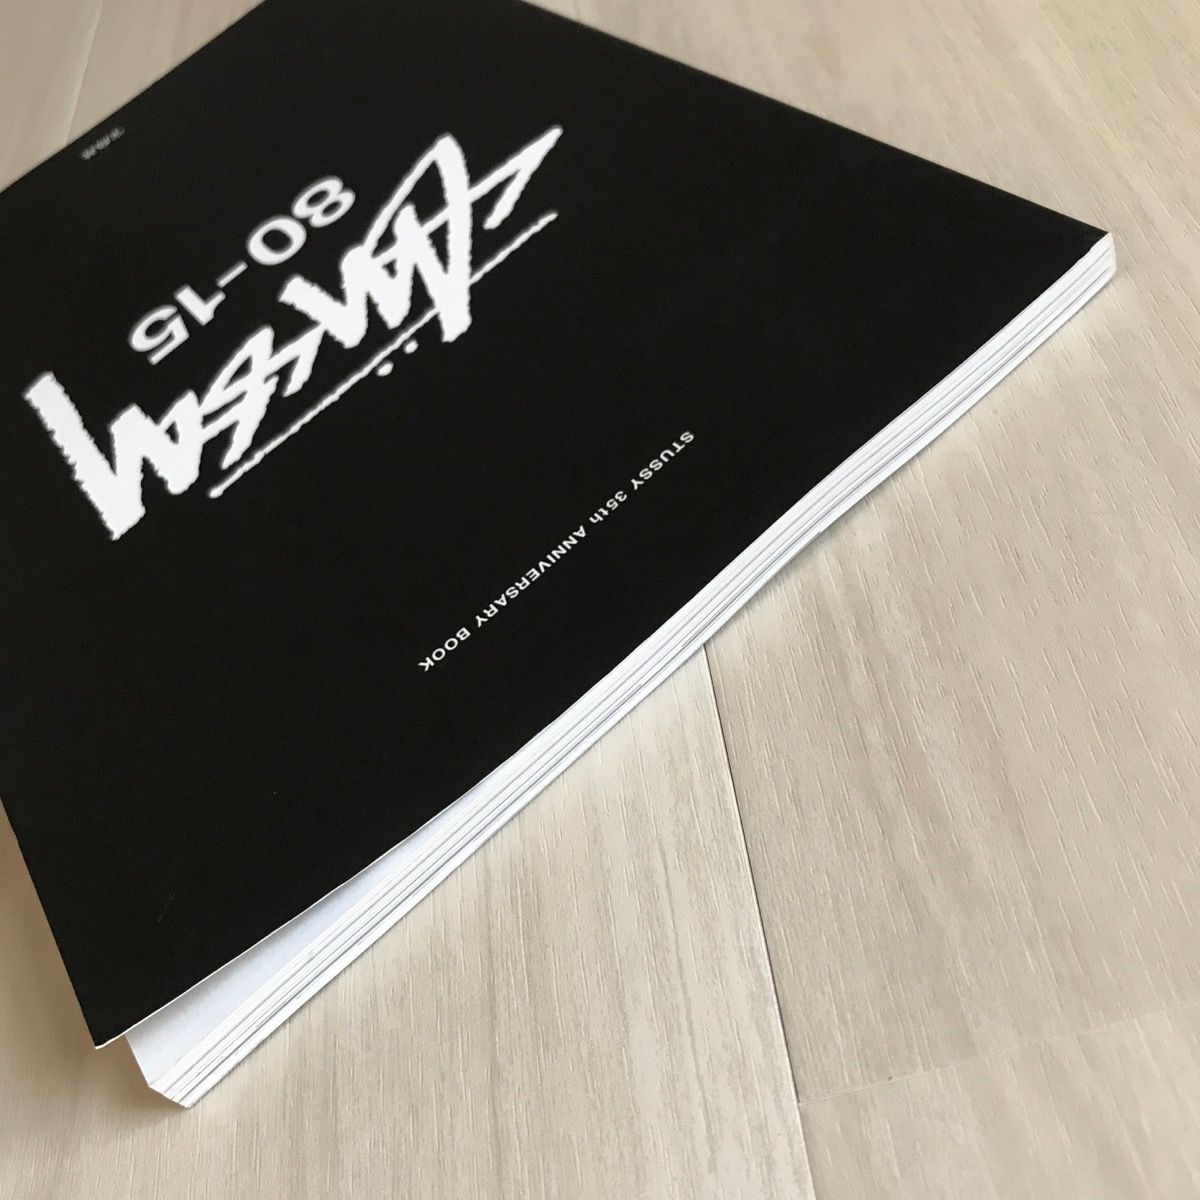 Stussy 35th anniversary book 80-15 - その他